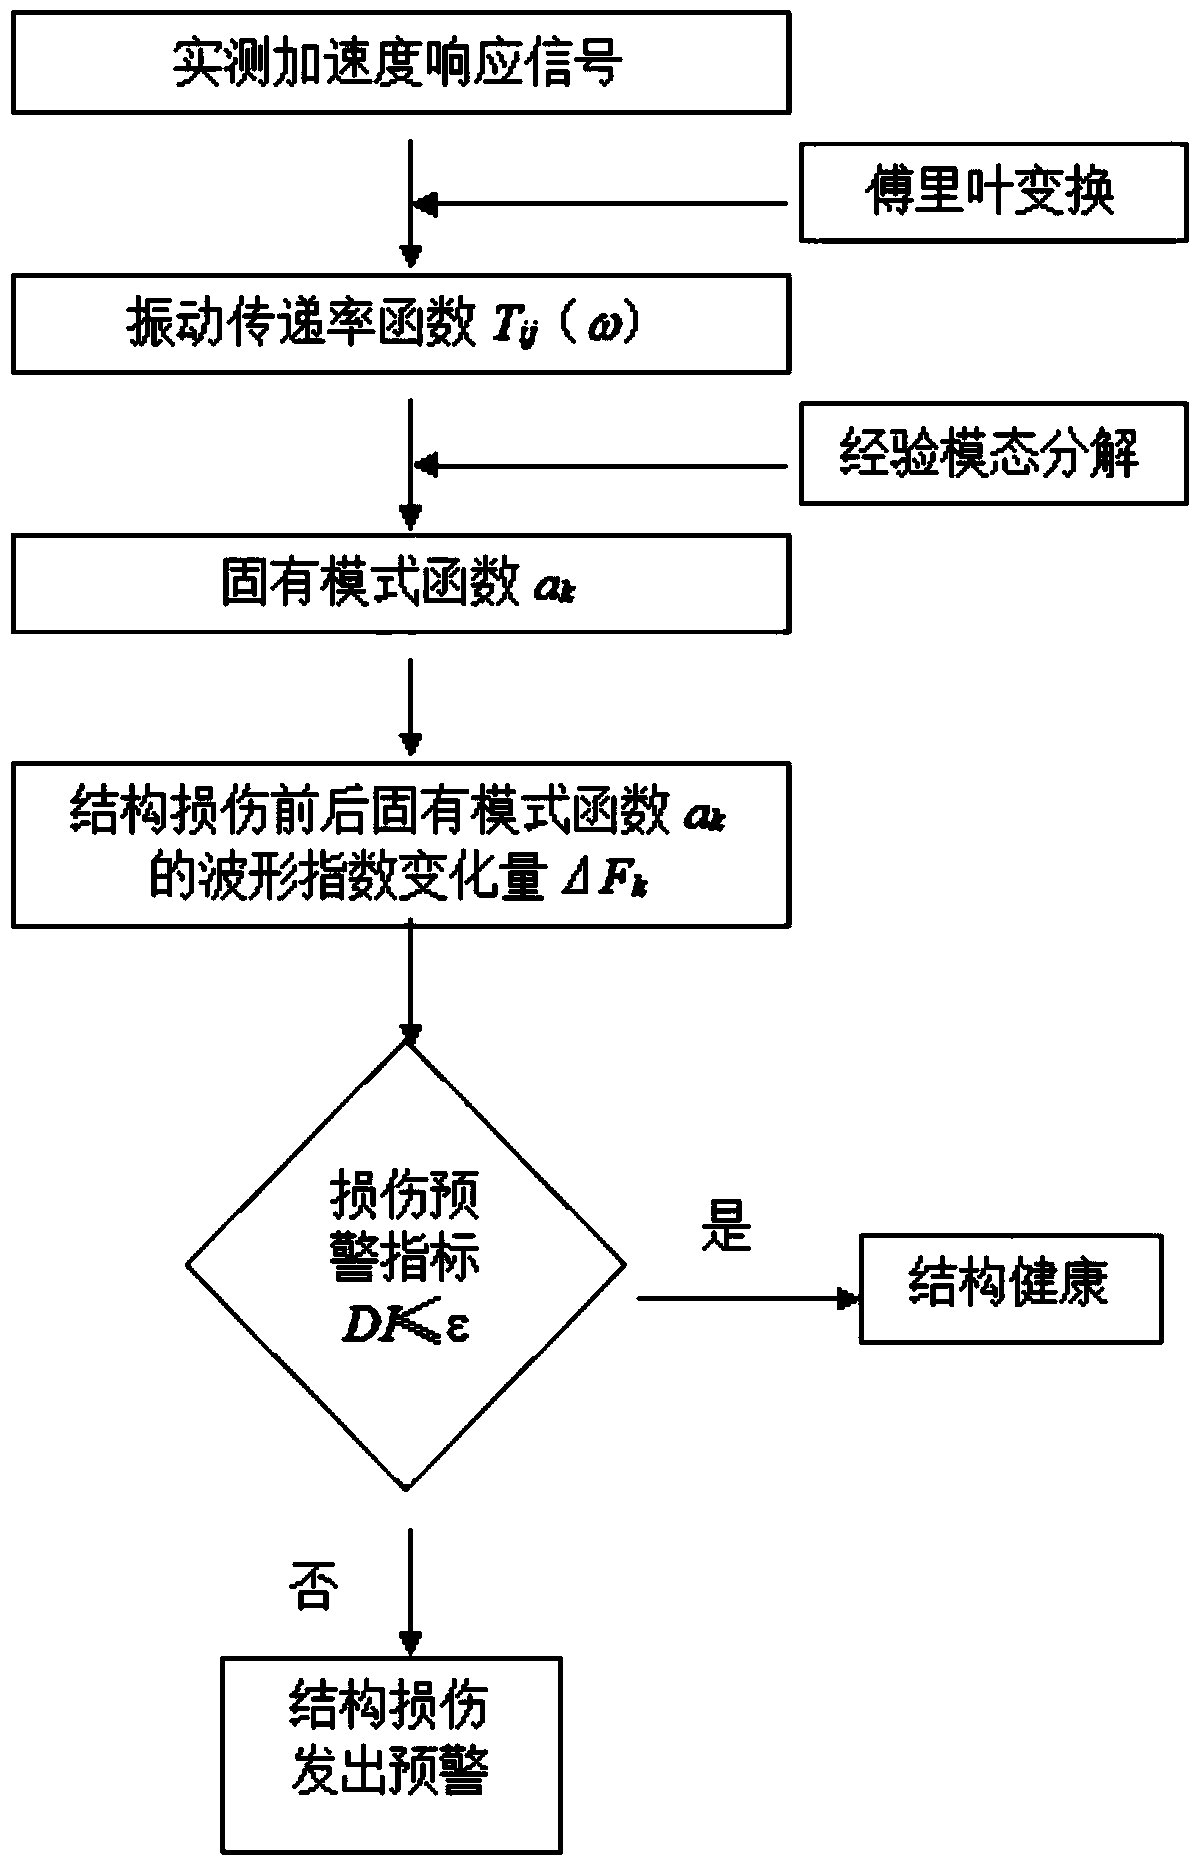 Structural damage early warning method based on empirical mode decomposition